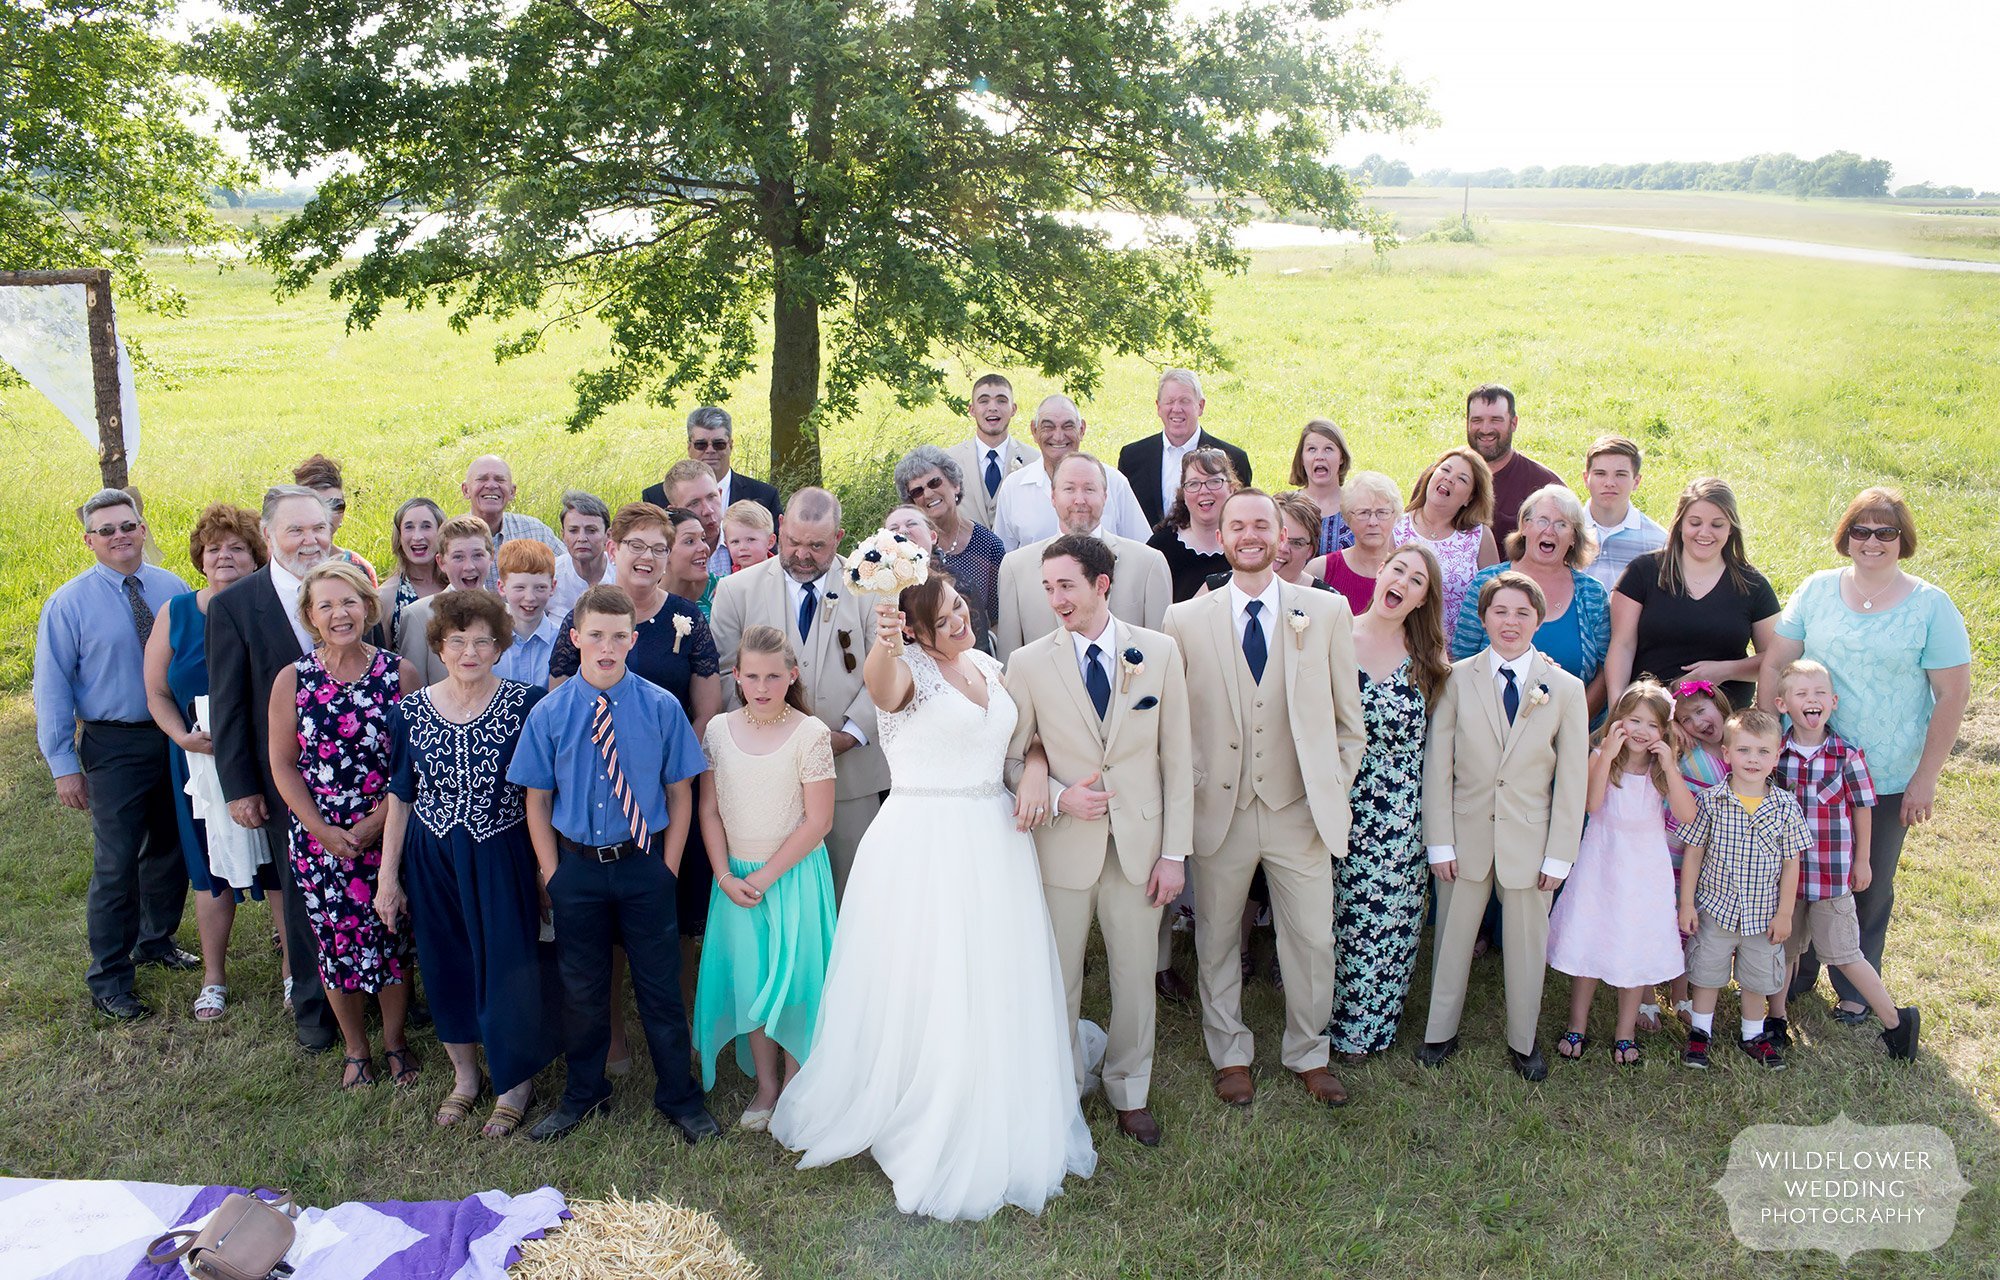 Huge family photo after the wedding at Bradford Farm in Columbia, MO.